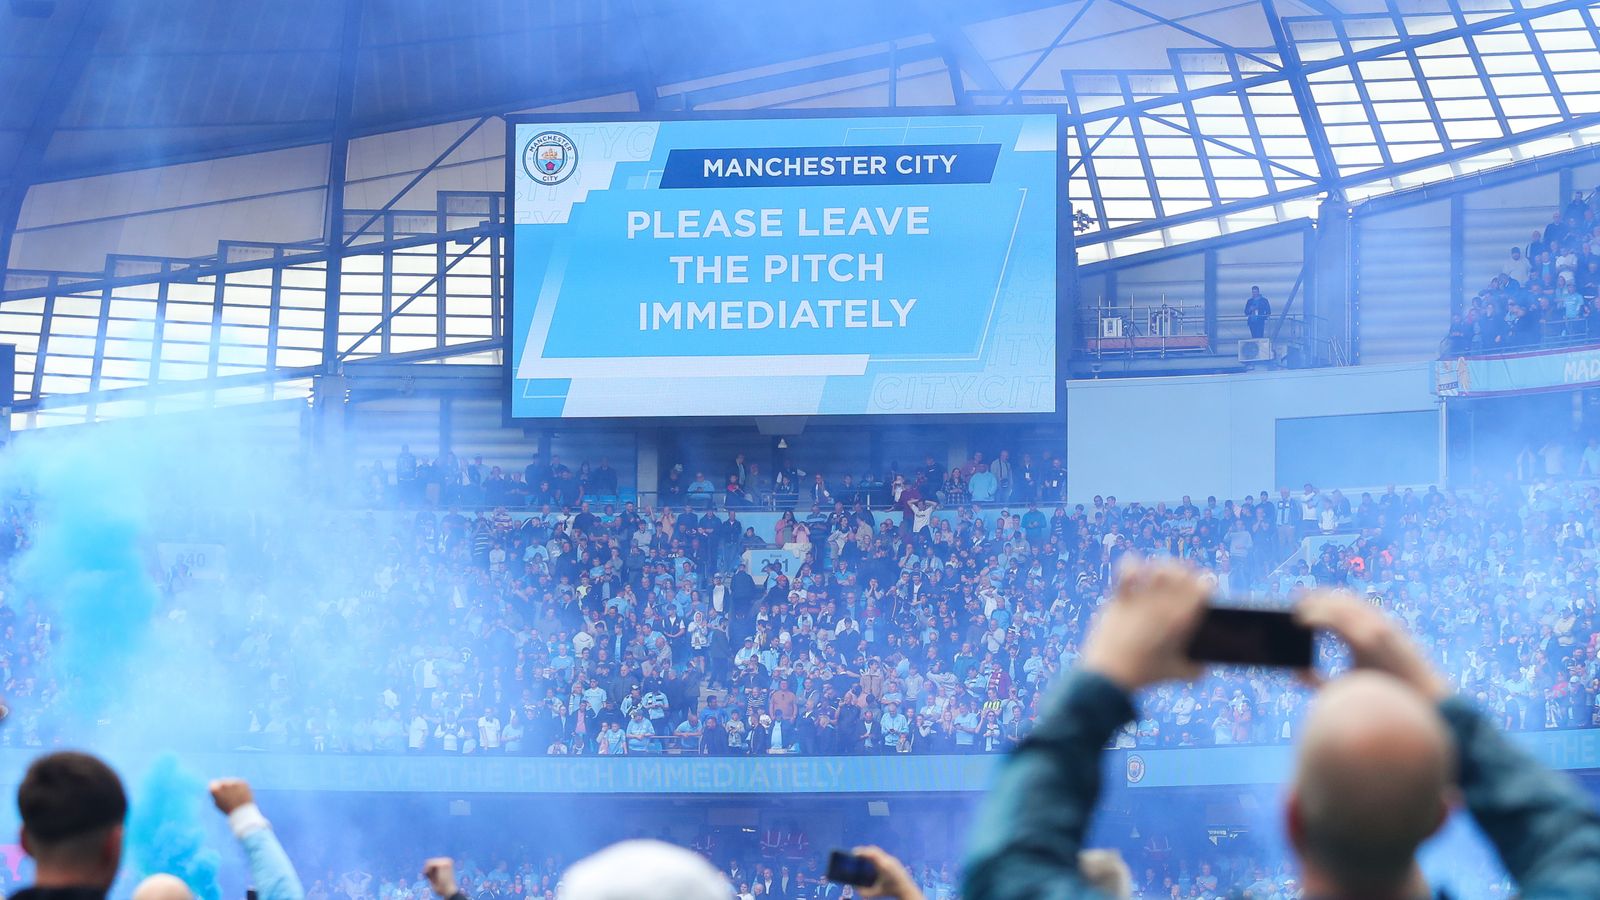 Two fans arrested after Manchester City’s title win